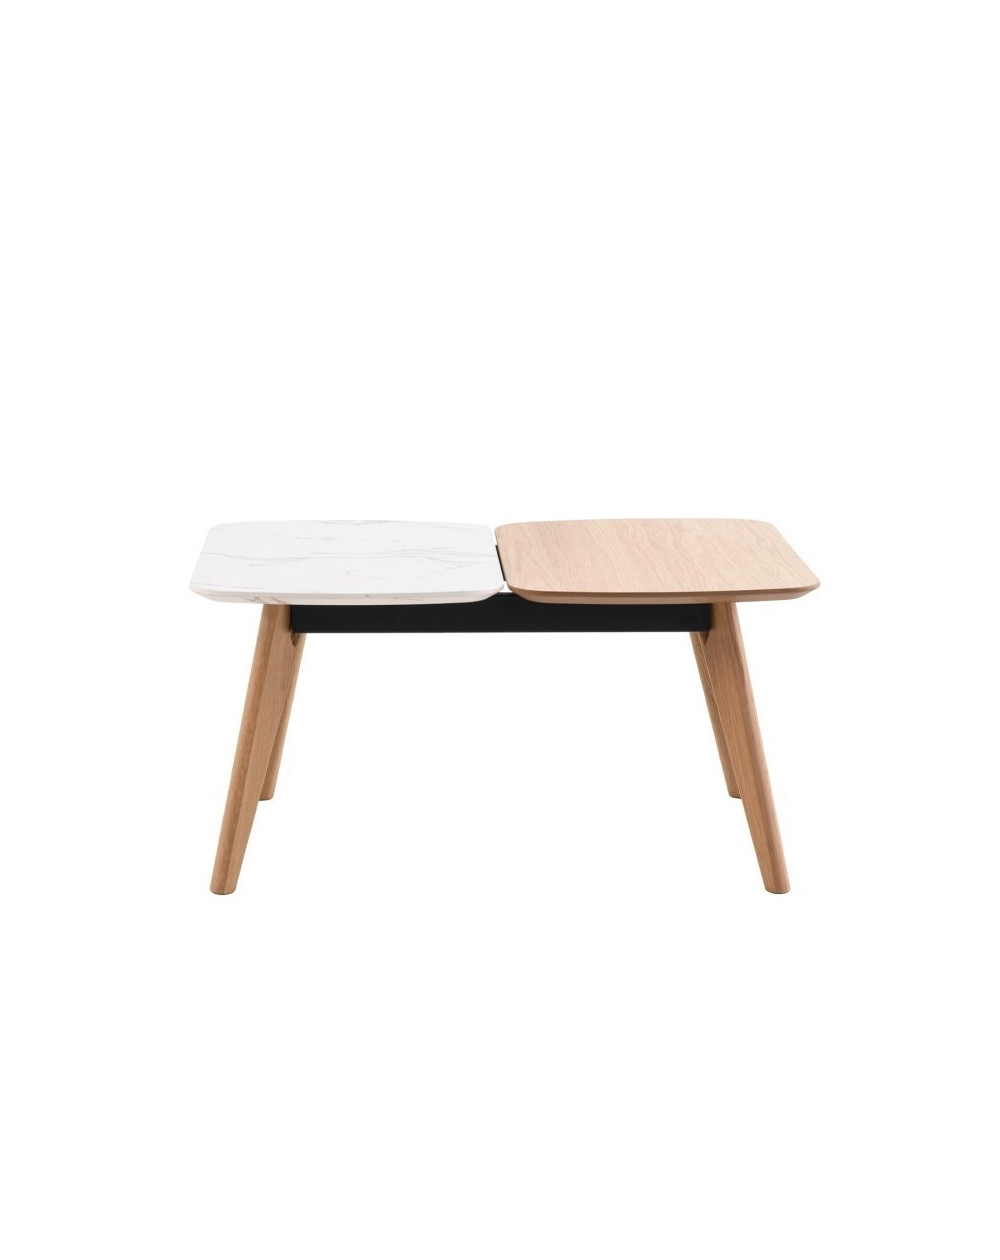 Oslo Round Table 60 cm Tensors DUDECO - Top material: Lacquered wood
Structure material: Beech wood - Reinforced Steel
Width: 